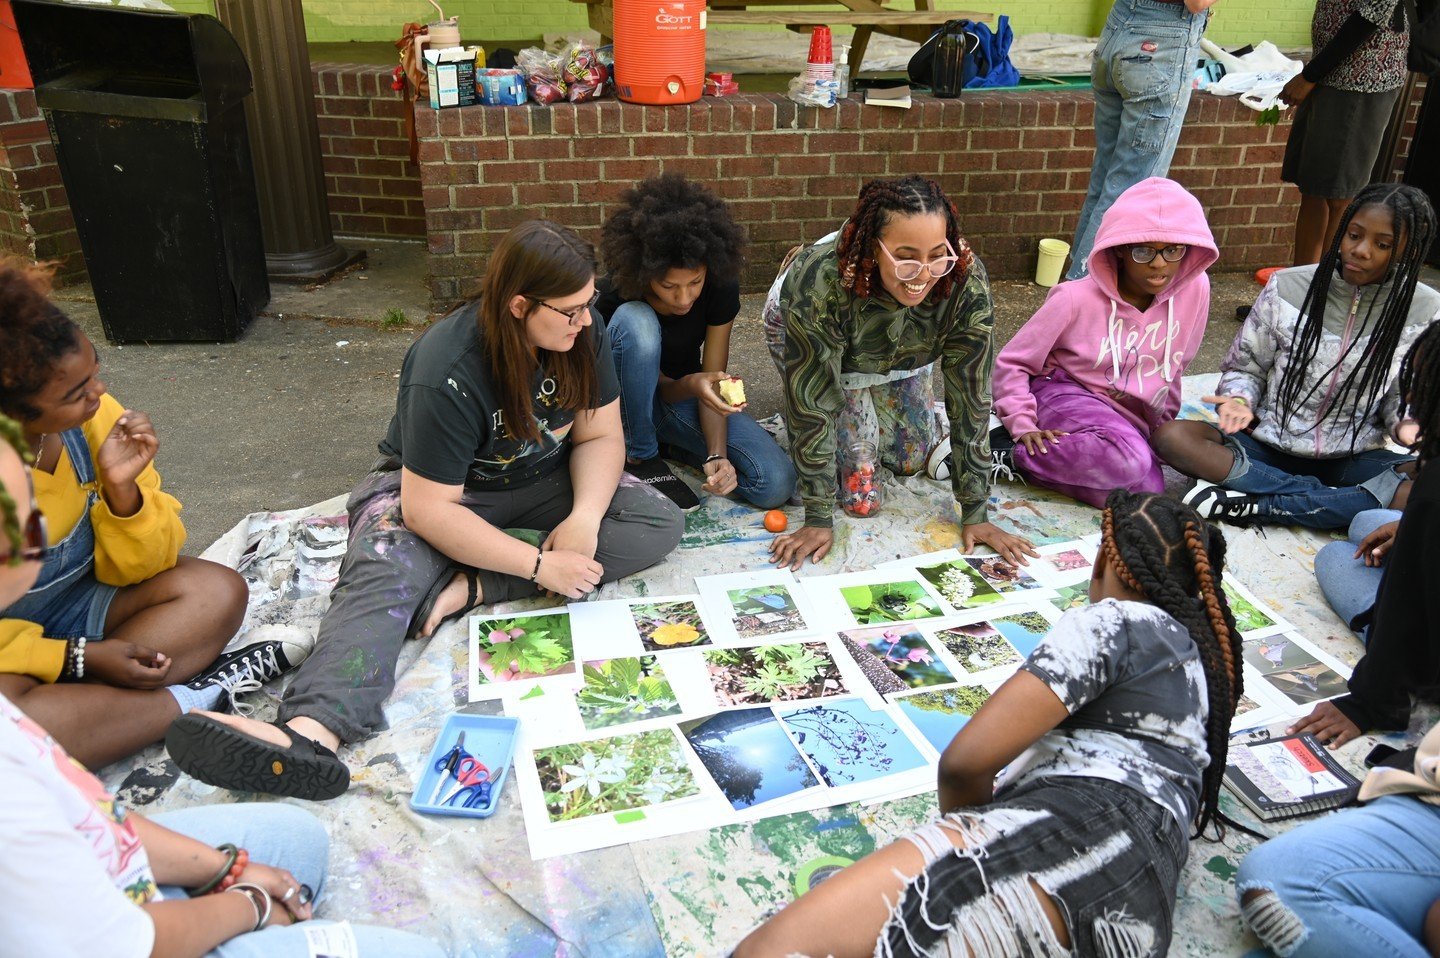 Creativity is in full bloom! Our imaginative MLK Club members are harnessing the beauty of nature to breathe life into Jefferson Park, turning it into a dazzling canvas of color and wonder! With their boundless creativity, our youth are crafting what